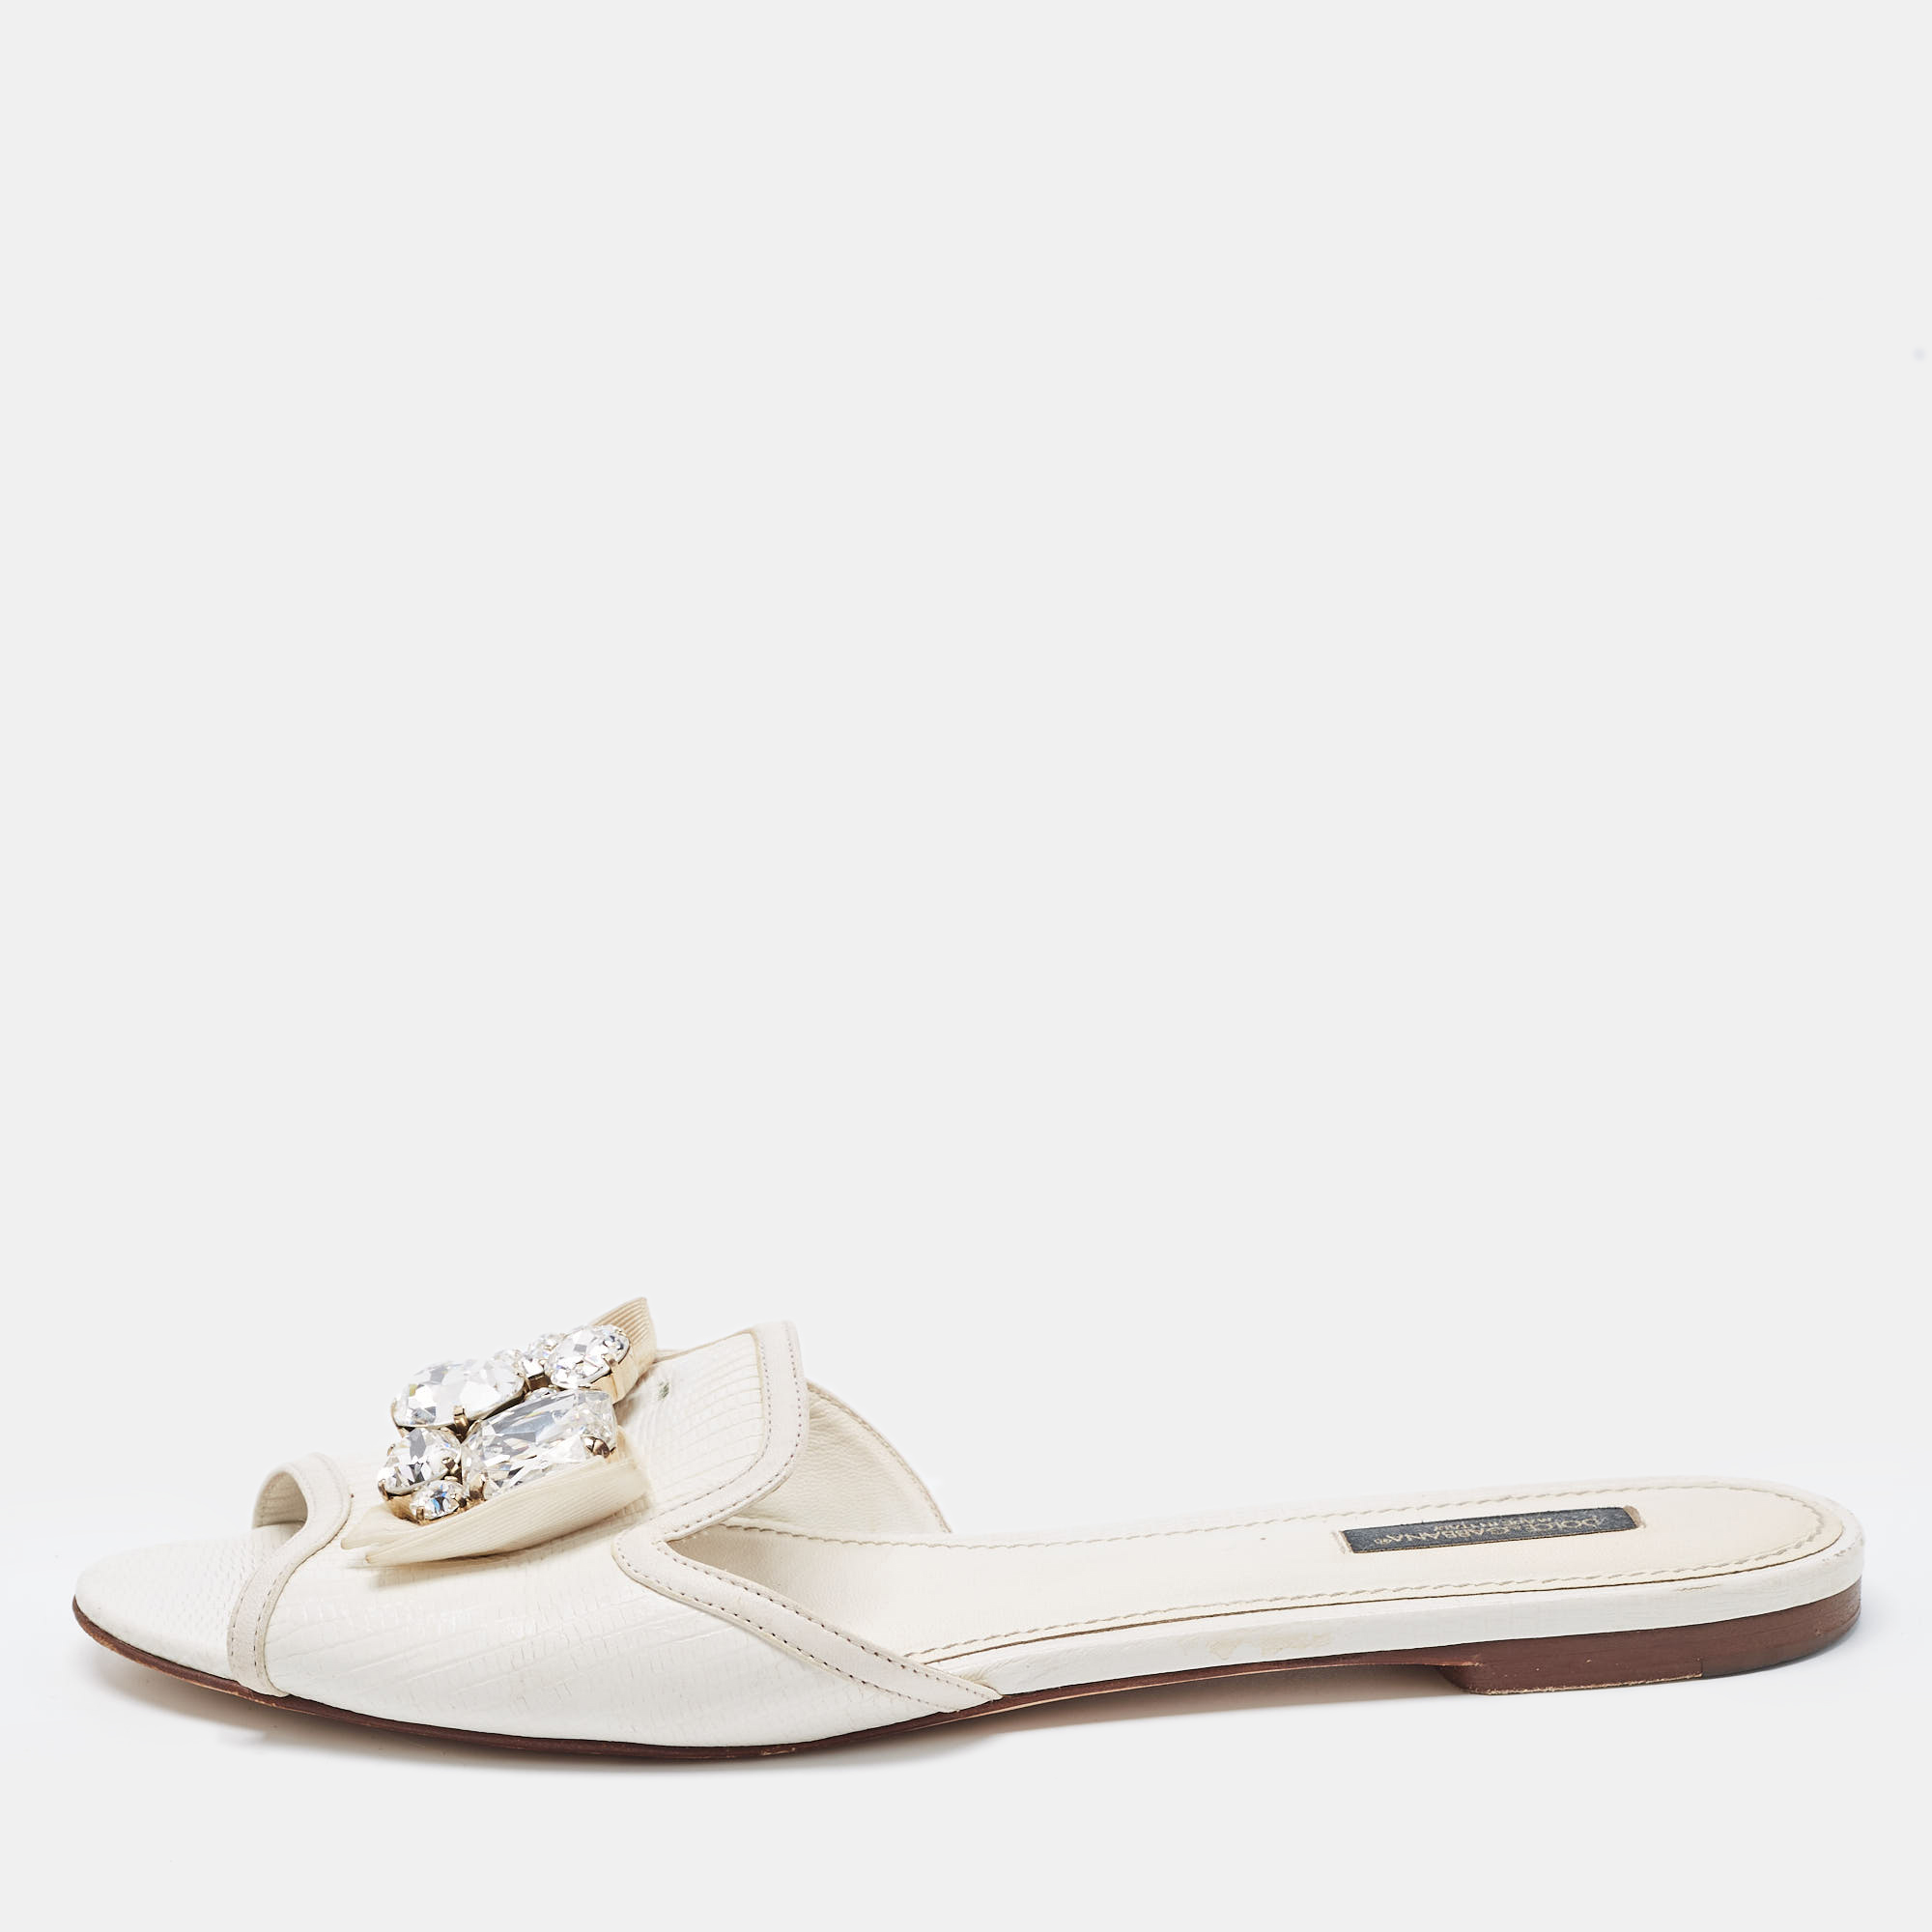 Pre-owned Dolce & Gabbana White Lizard Embossed Leather Crystal Embellished Bow Flat Slides Size 40.5